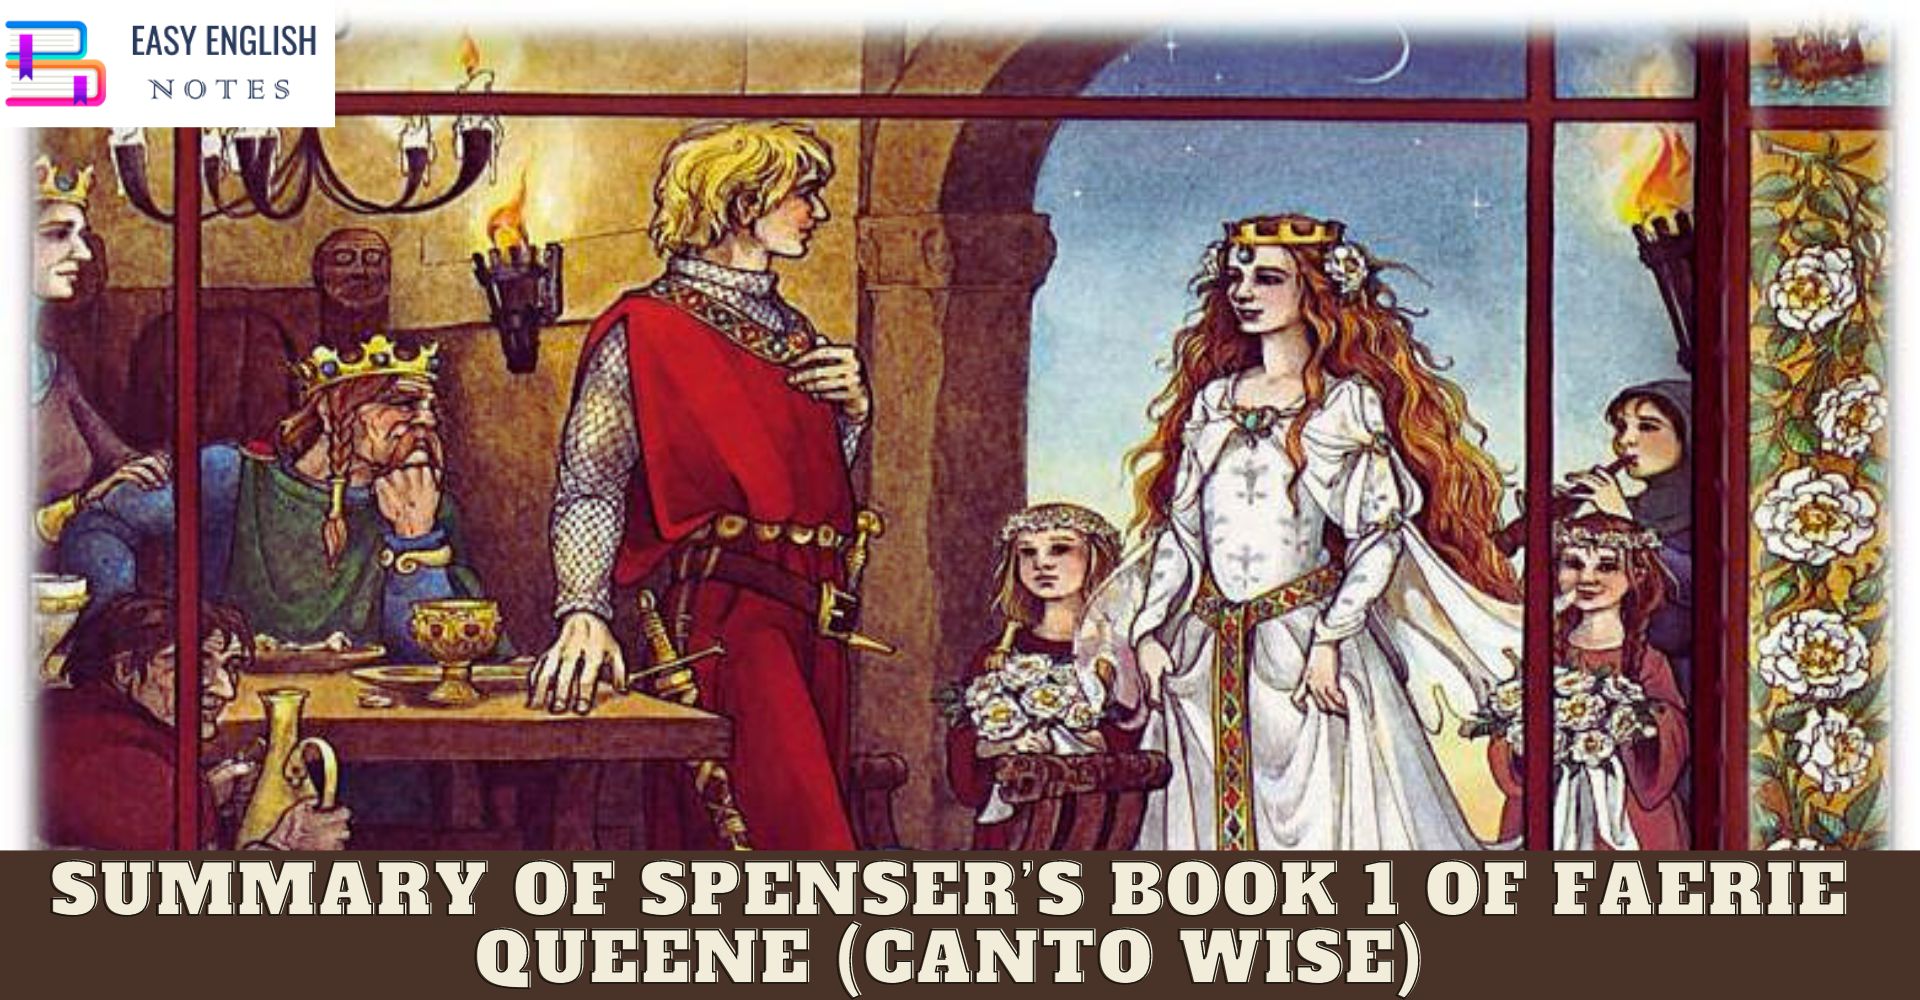 Summary of Spenser’s book 1 of Faerie Queene (Canto wise)